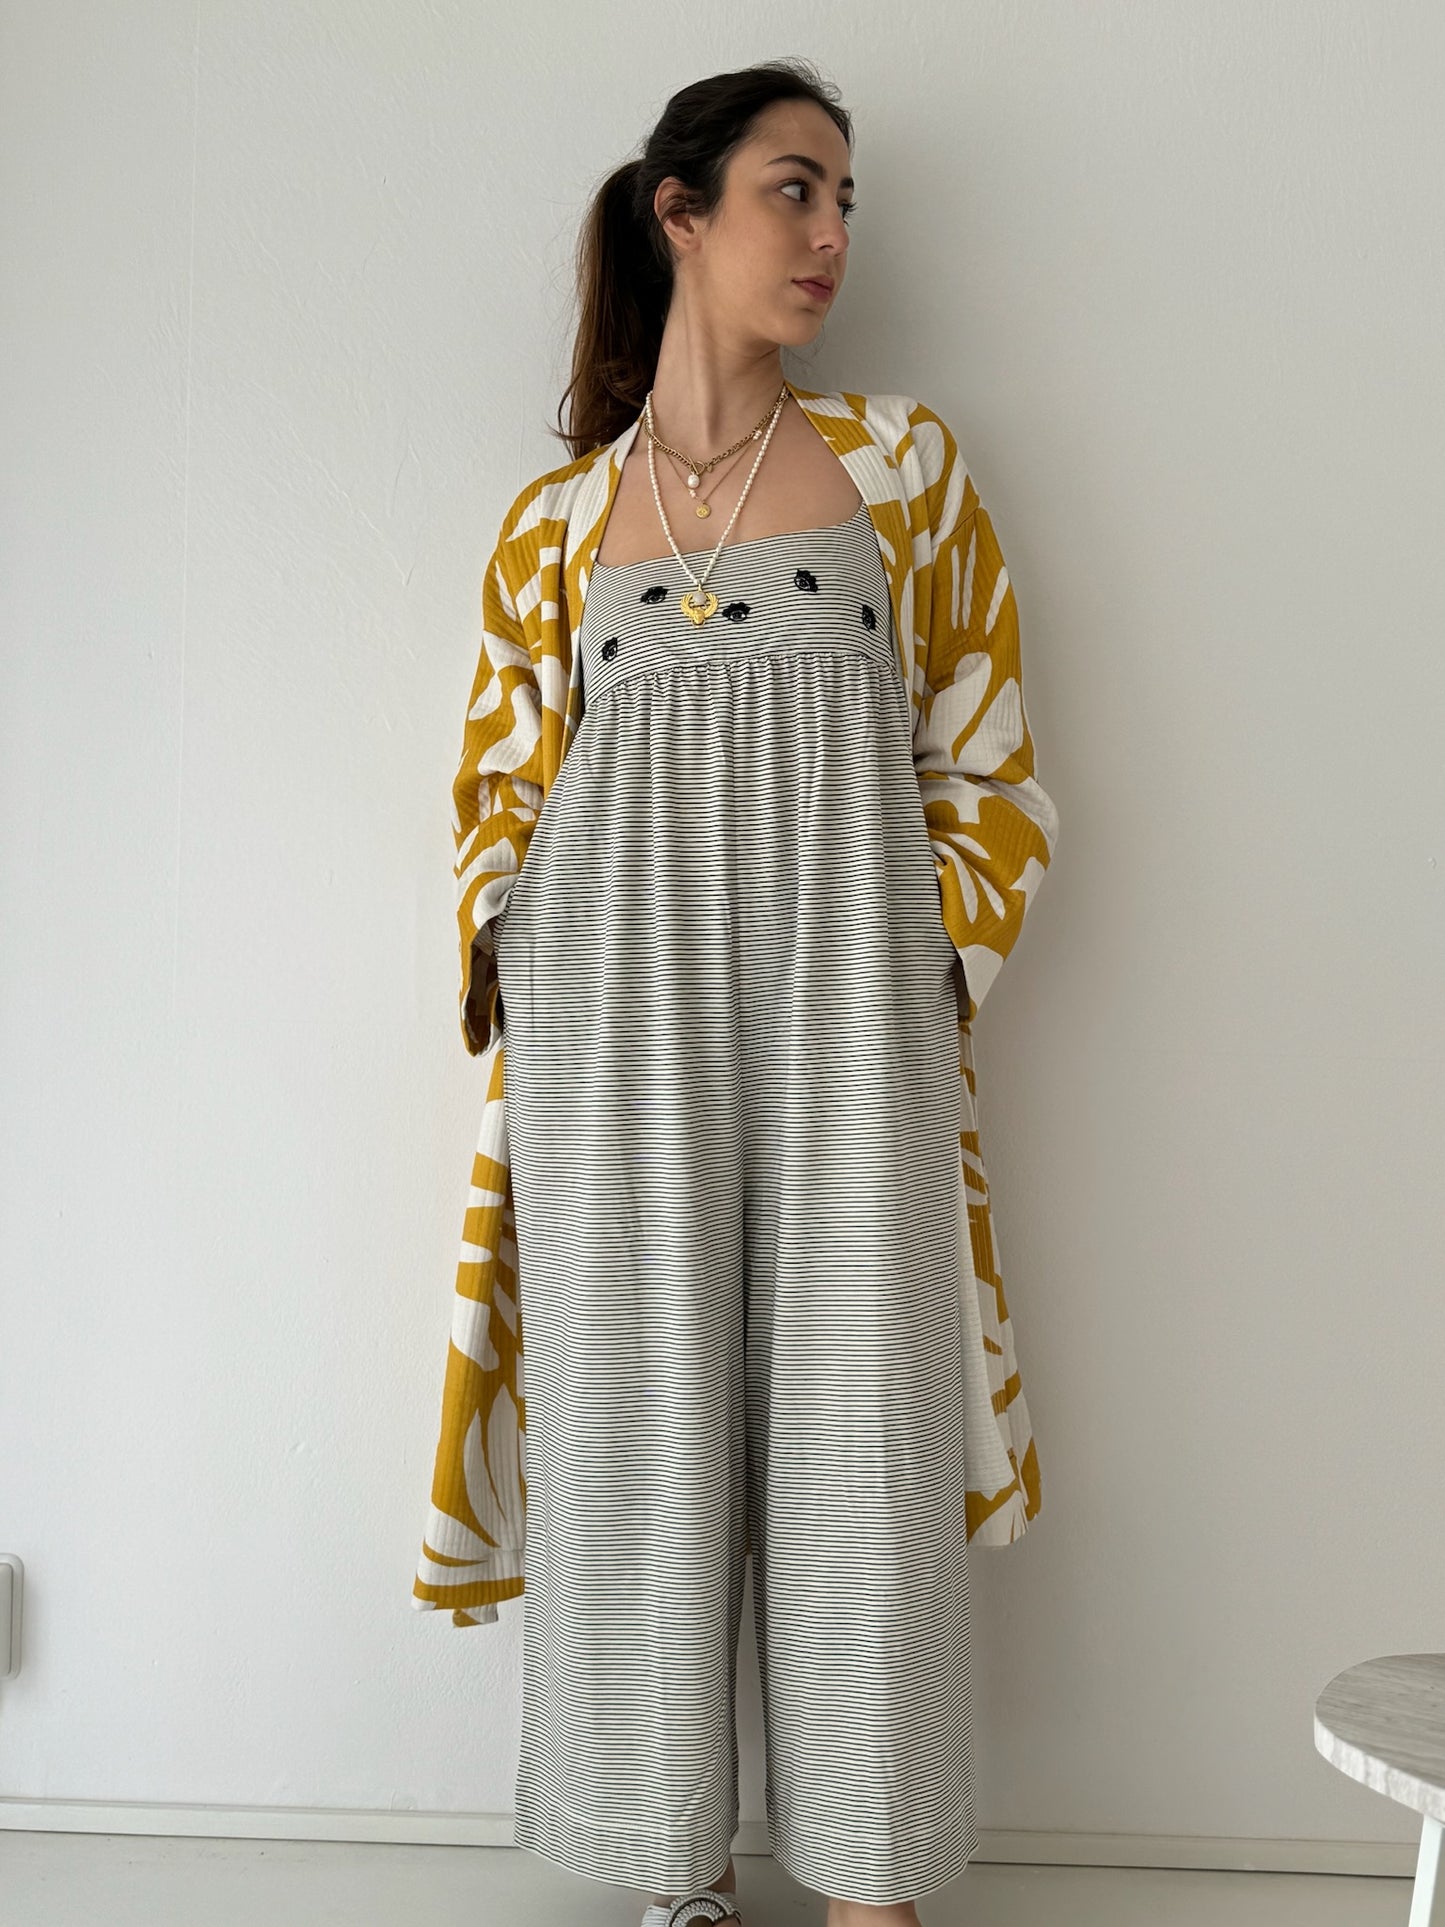 Yellow and white kimono - 100% cotton with contemporary pattern in warm yellow and off white, can be used as a bathrobe, homerobe or jacket